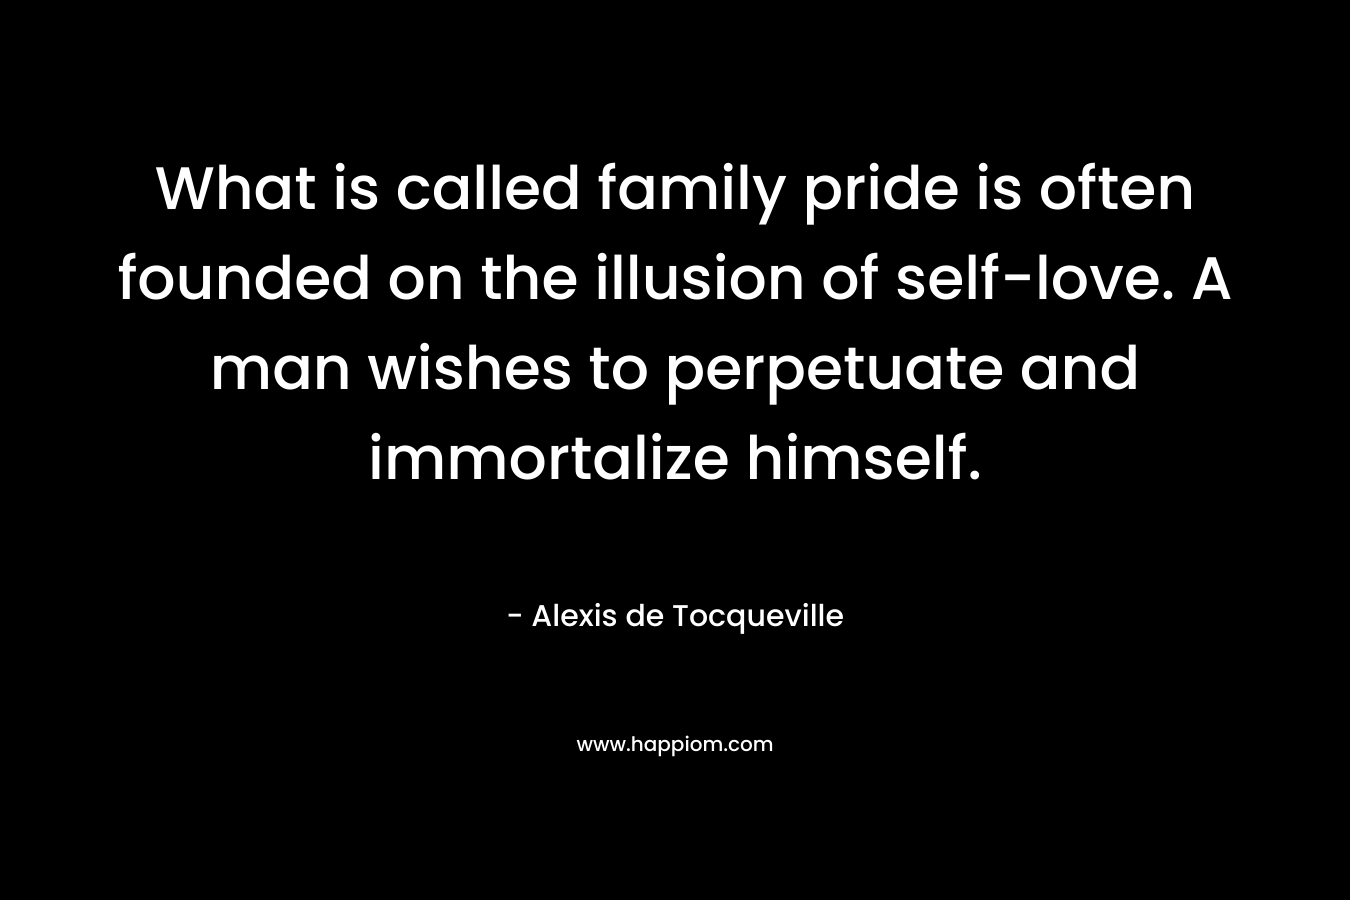 What is called family pride is often founded on the illusion of self-love. A man wishes to perpetuate and immortalize himself. – Alexis de Tocqueville